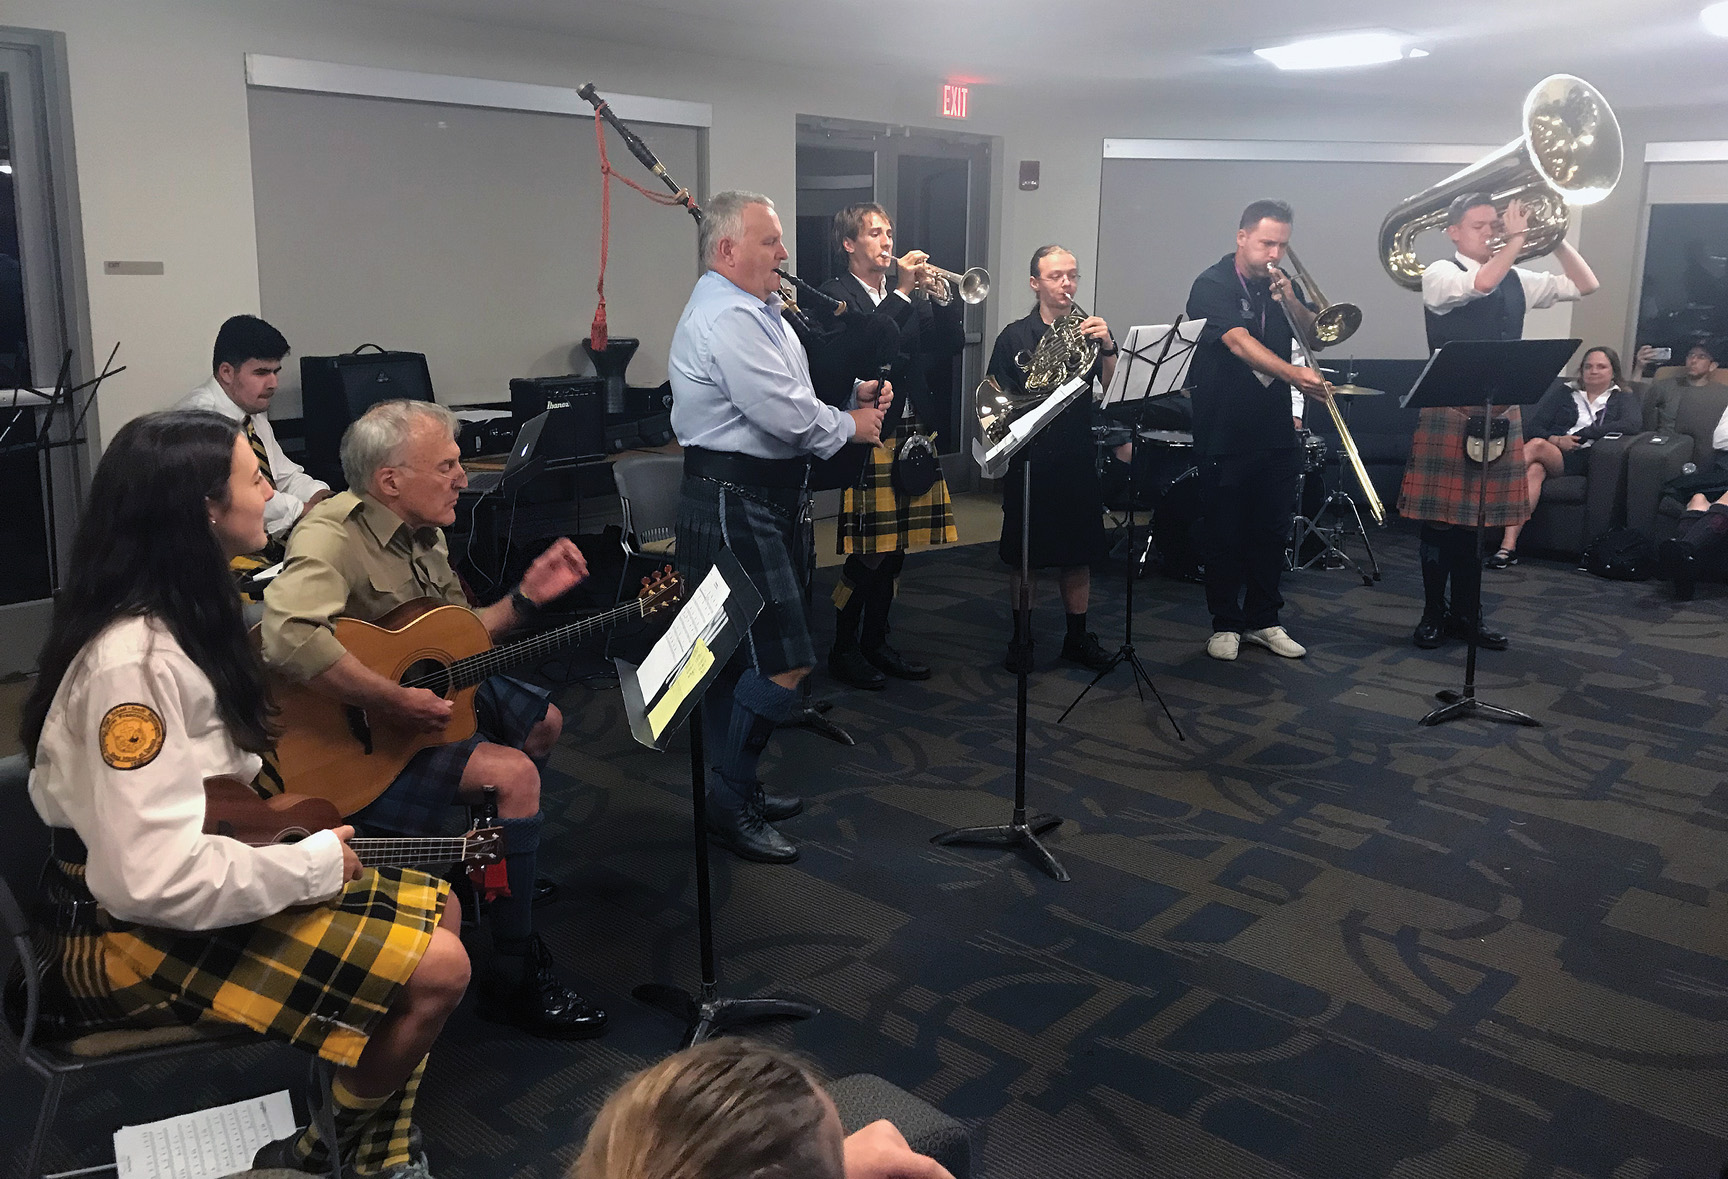 Celtic Ensemble music program at Balmoral's ESY campus in East Stroudsburg, PA.